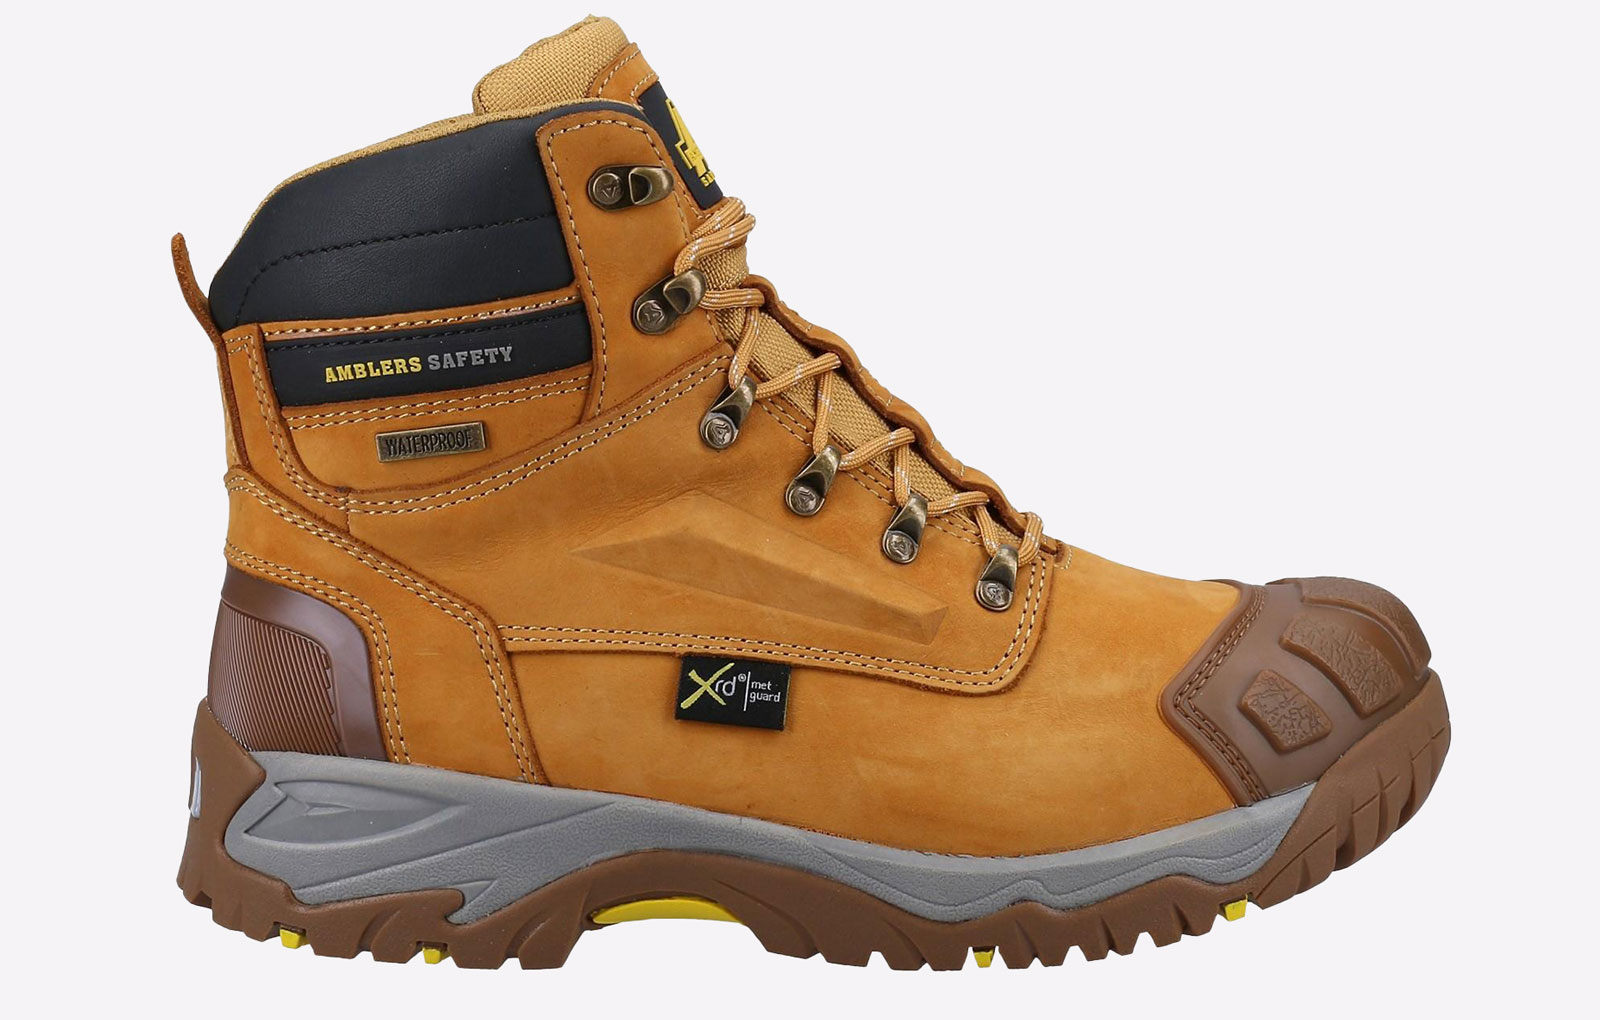 Amblers Safety 986 WATERPROOF Boots Mens - GRD-37567-69978-13